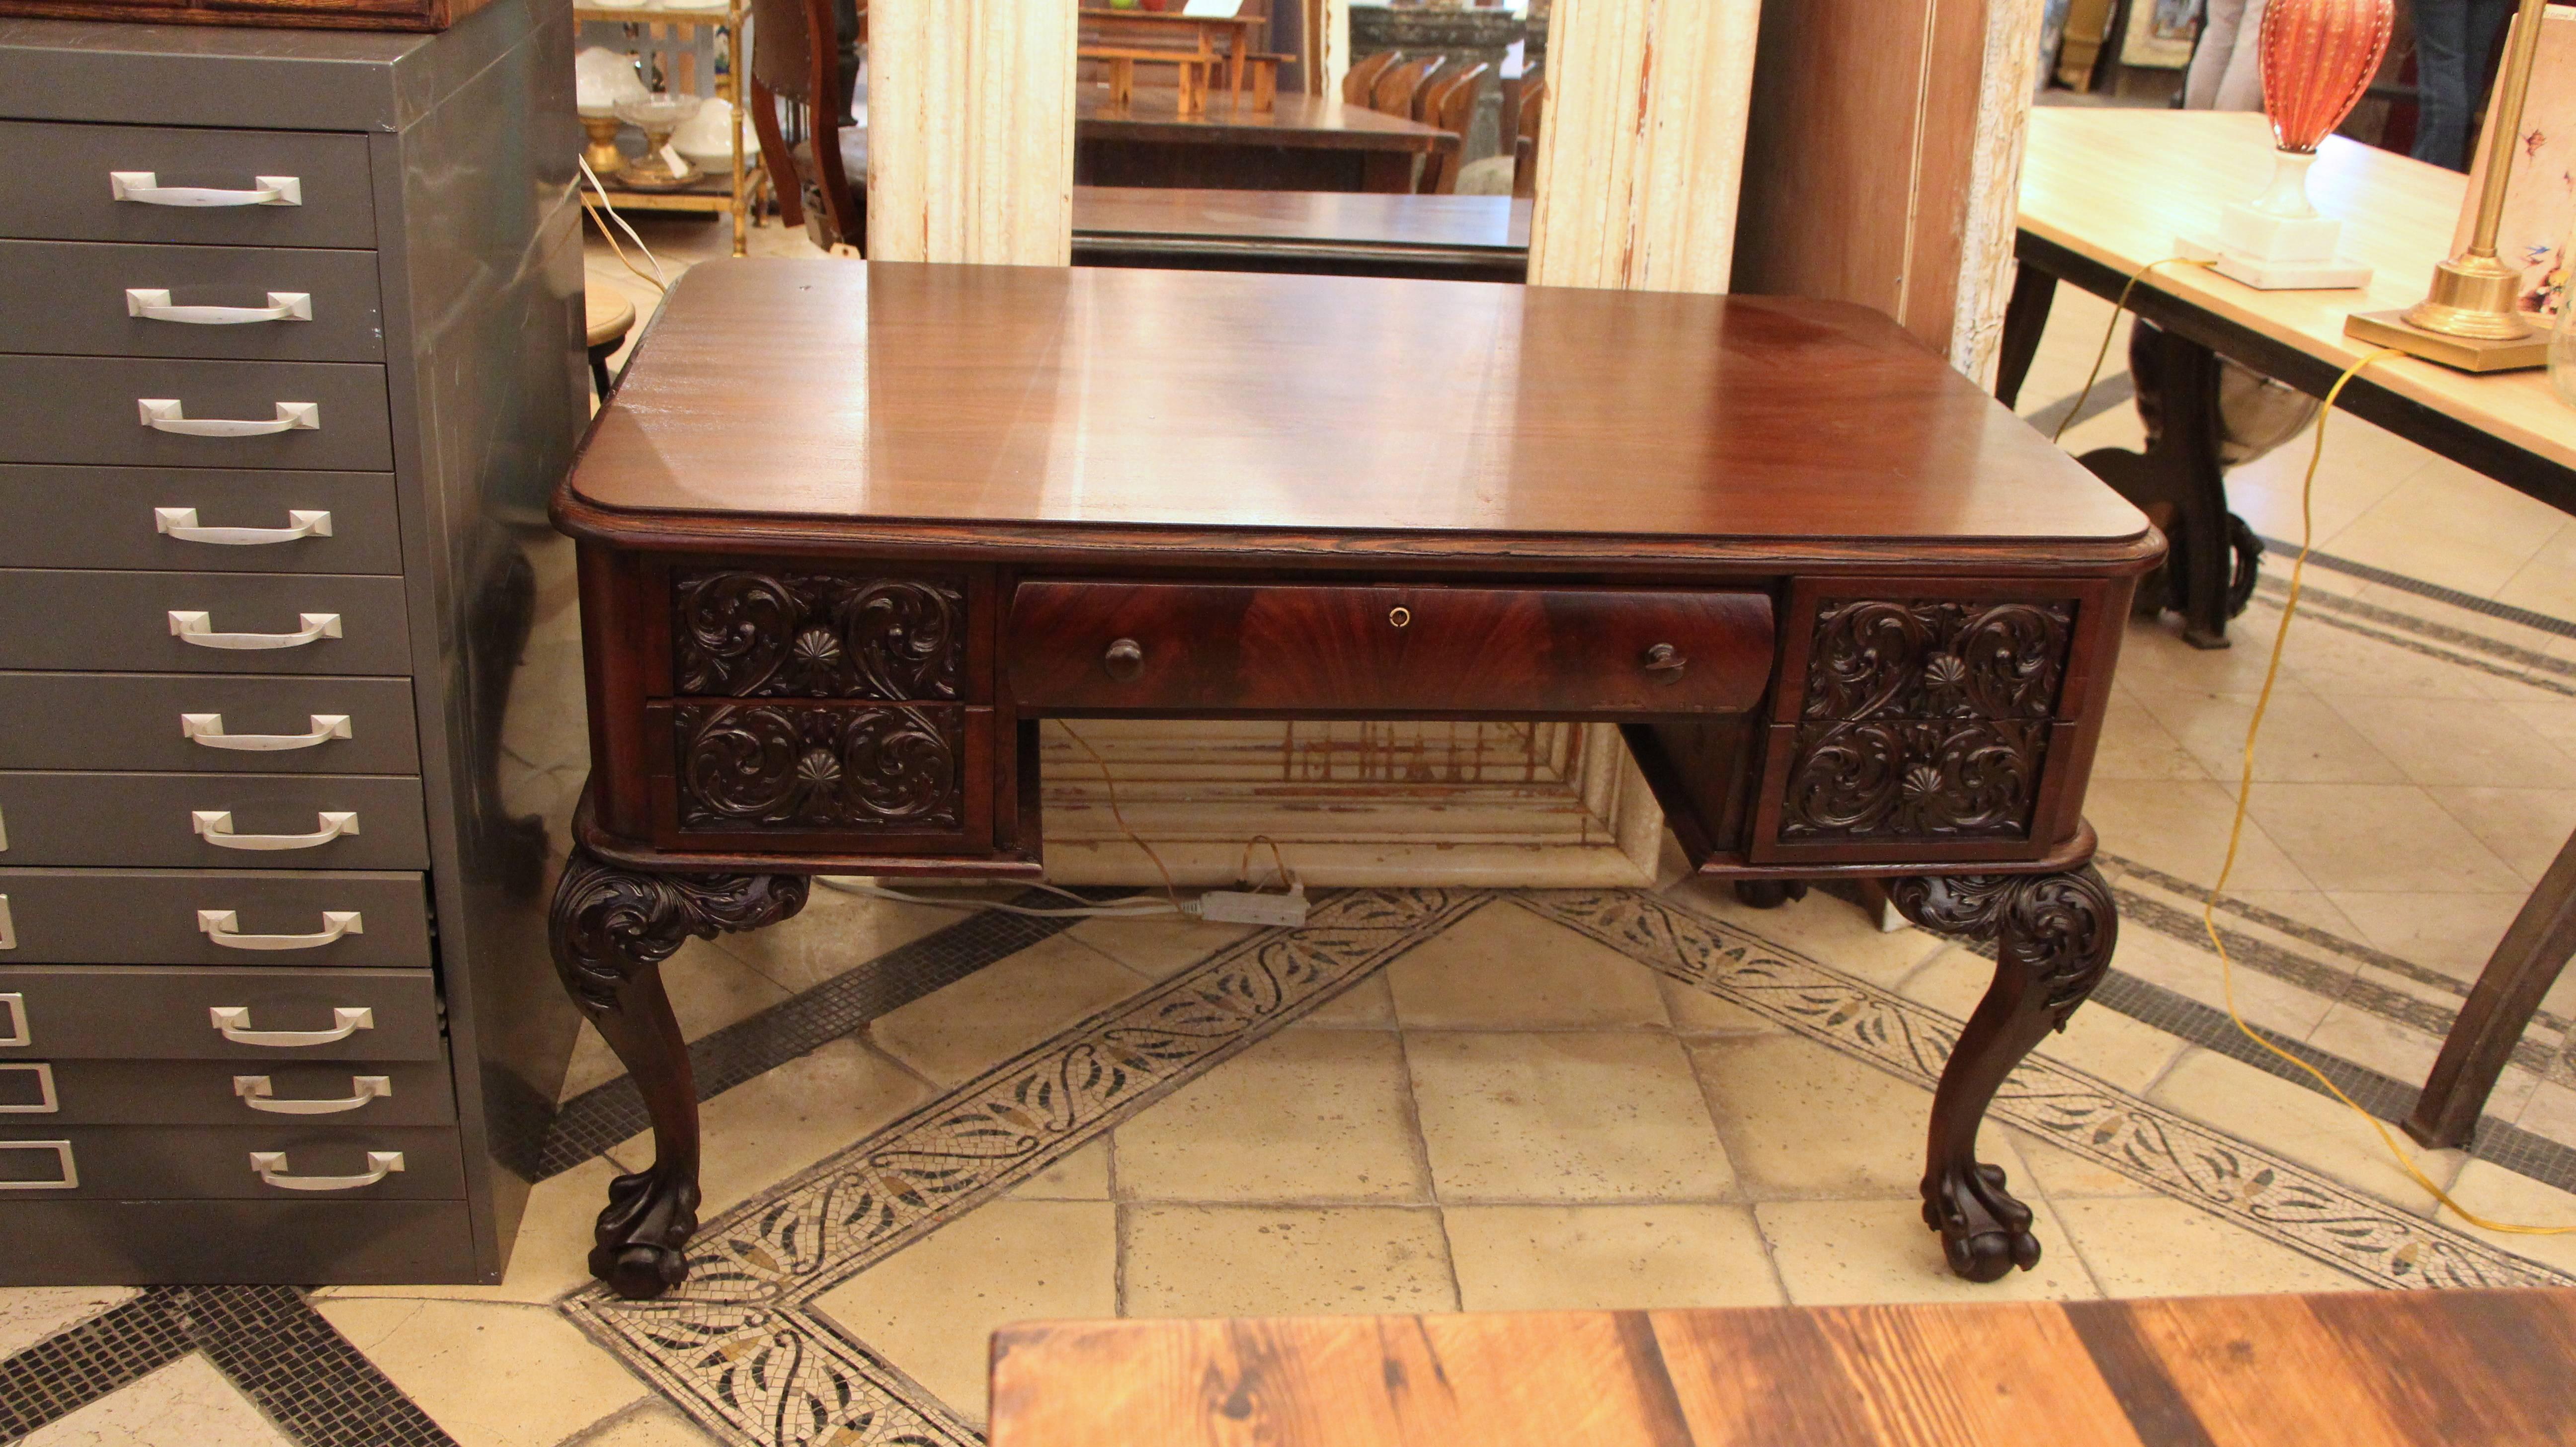 1910s petite flame mahogany carved desk with claw feet in overall great condition, with very minor imperfections in the veneer. Recently restored. One small piece missing on one carved foot and part of one of the carved pulls. This item can be